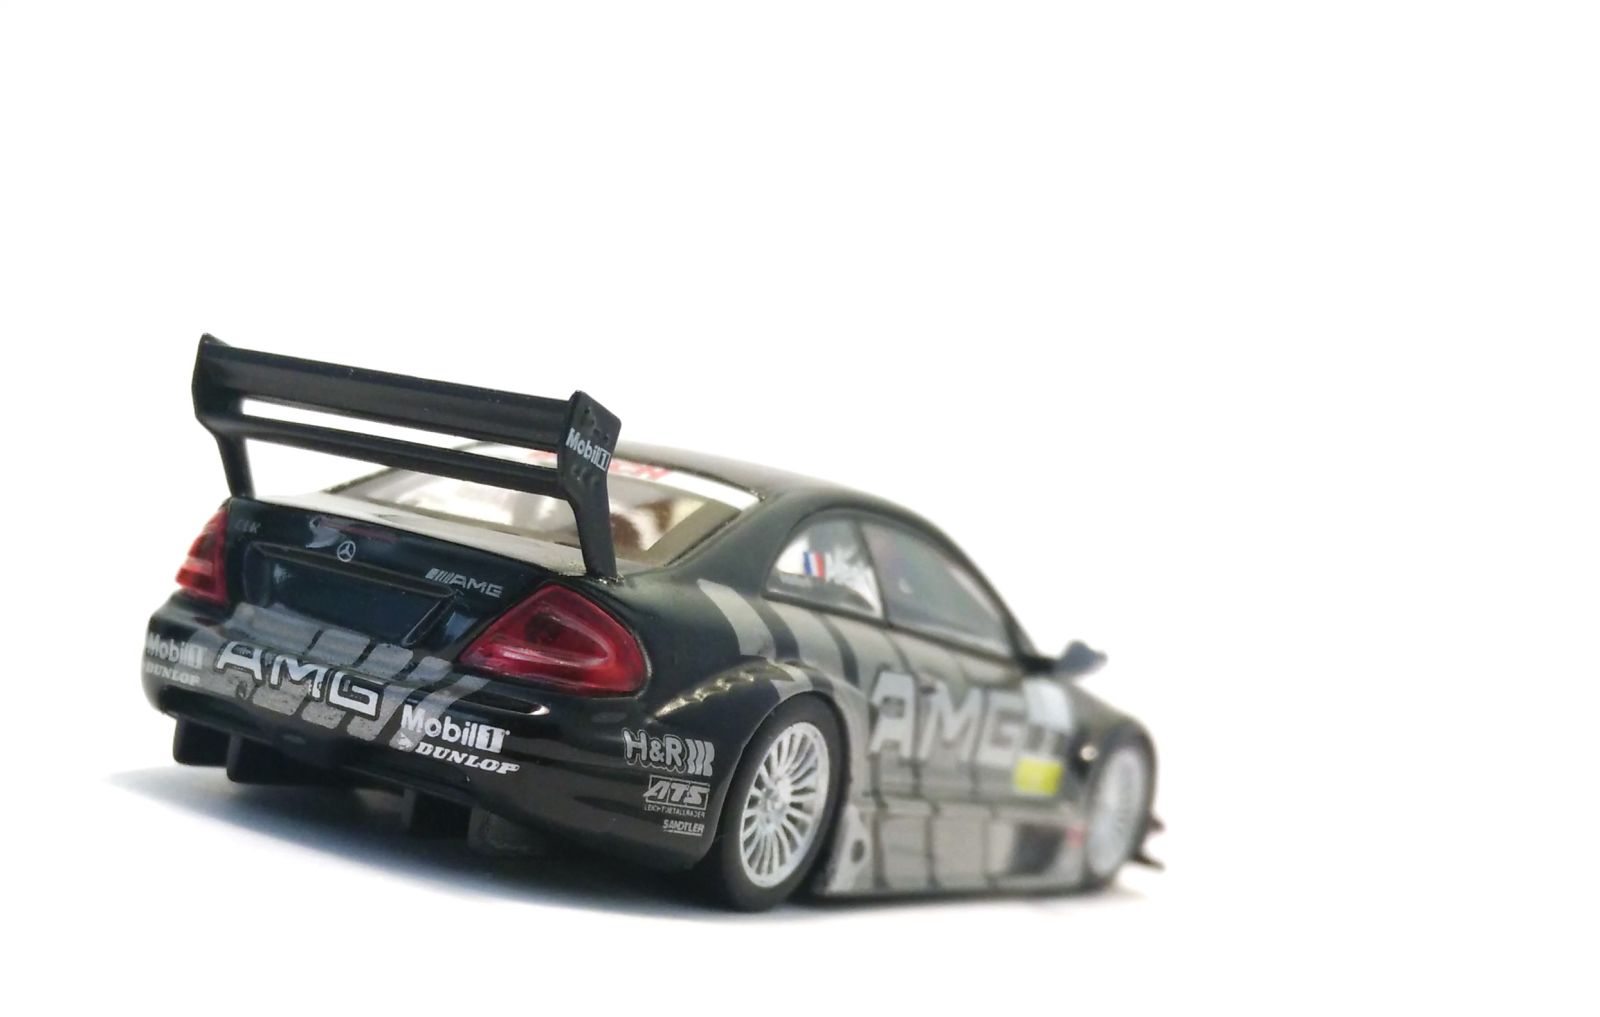 Illustration for article titled Teutonic Tuesday: Mercedes-Benz AMG CLK DTM